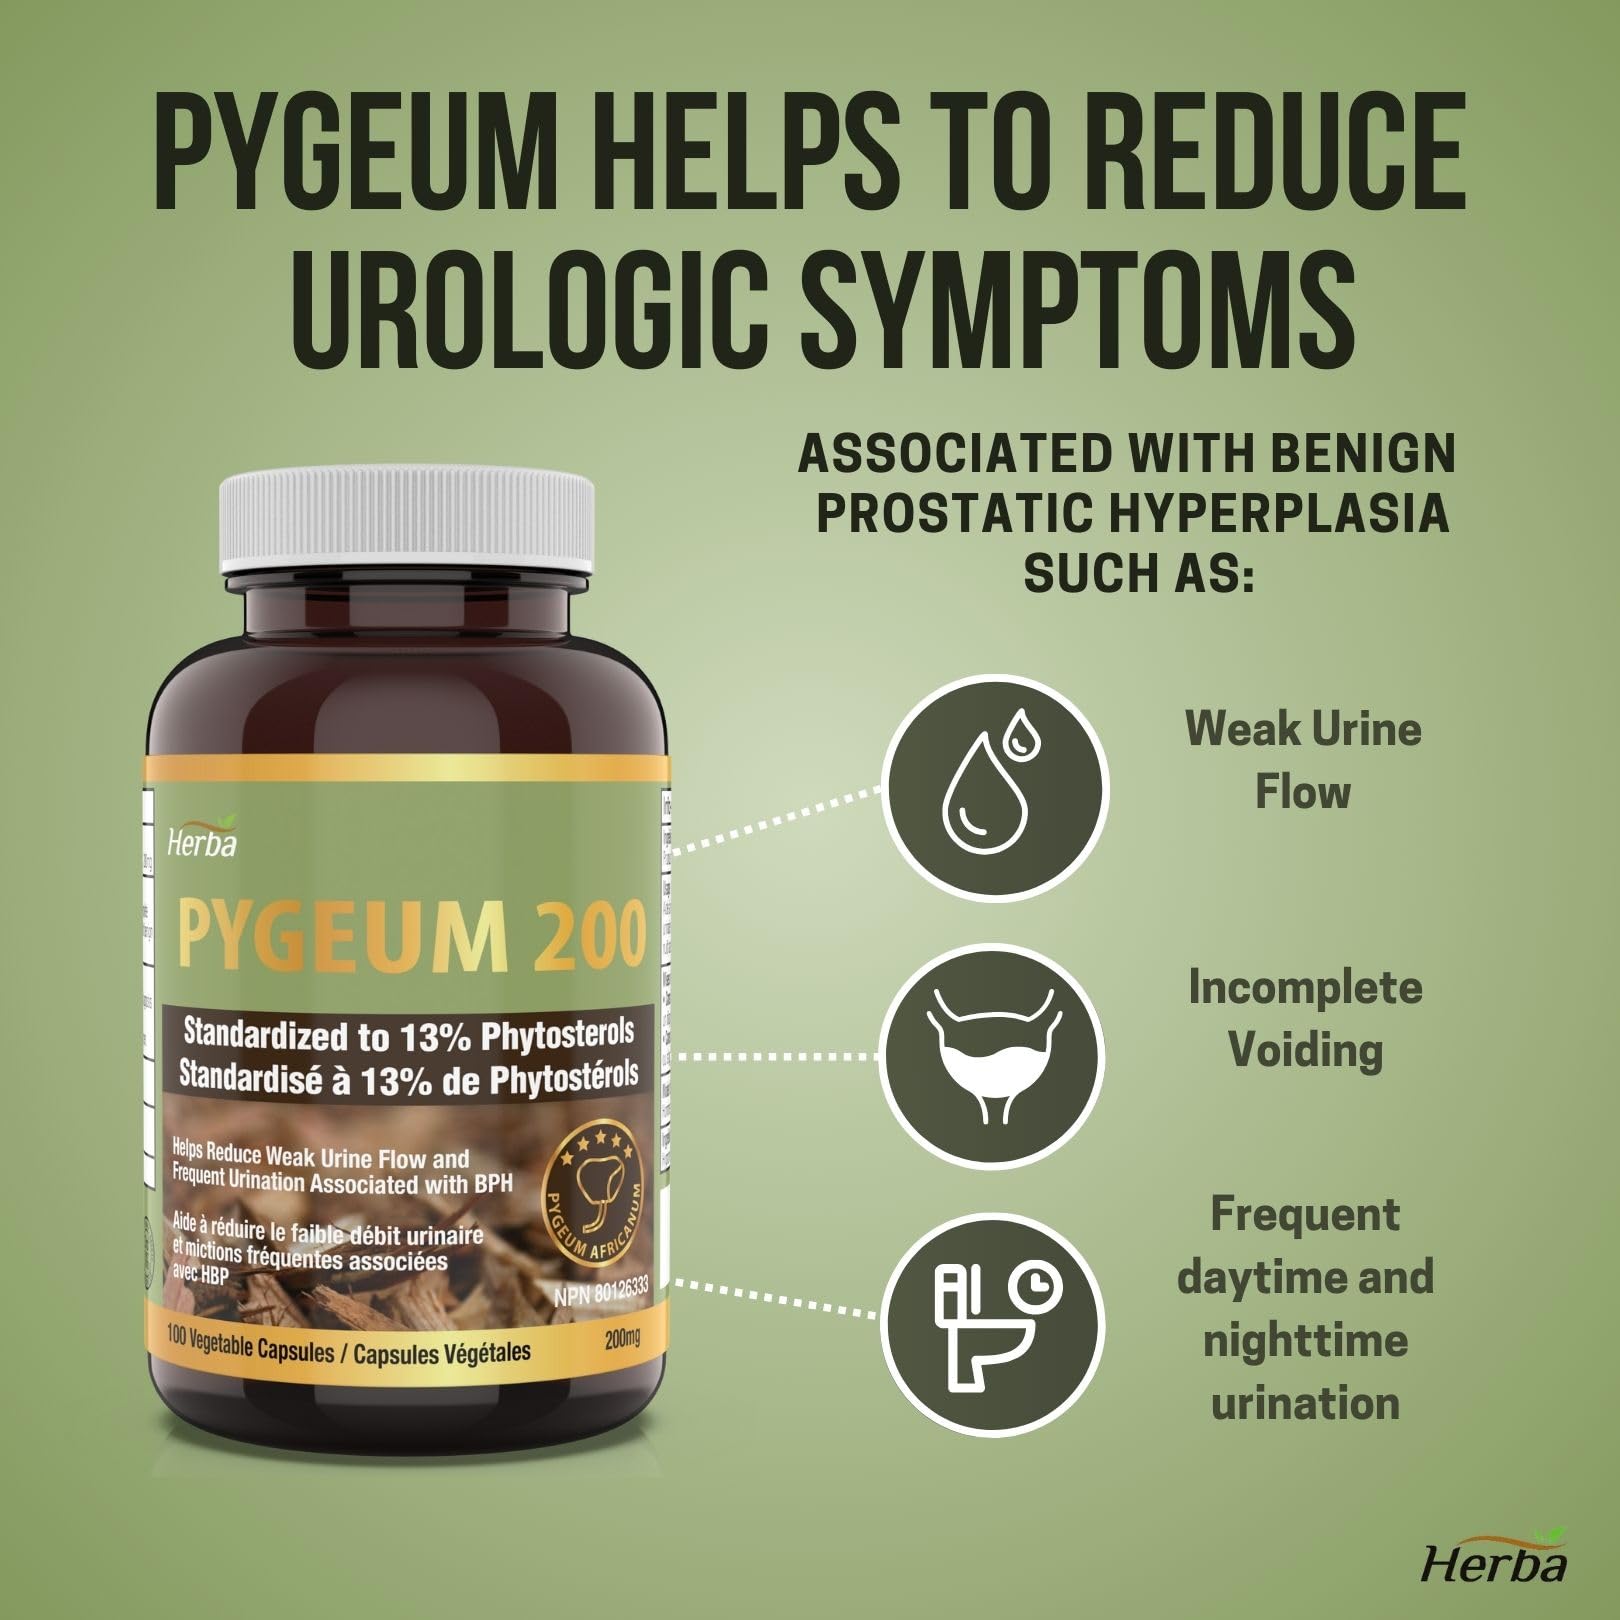 buy pygeum supplement made in Canada